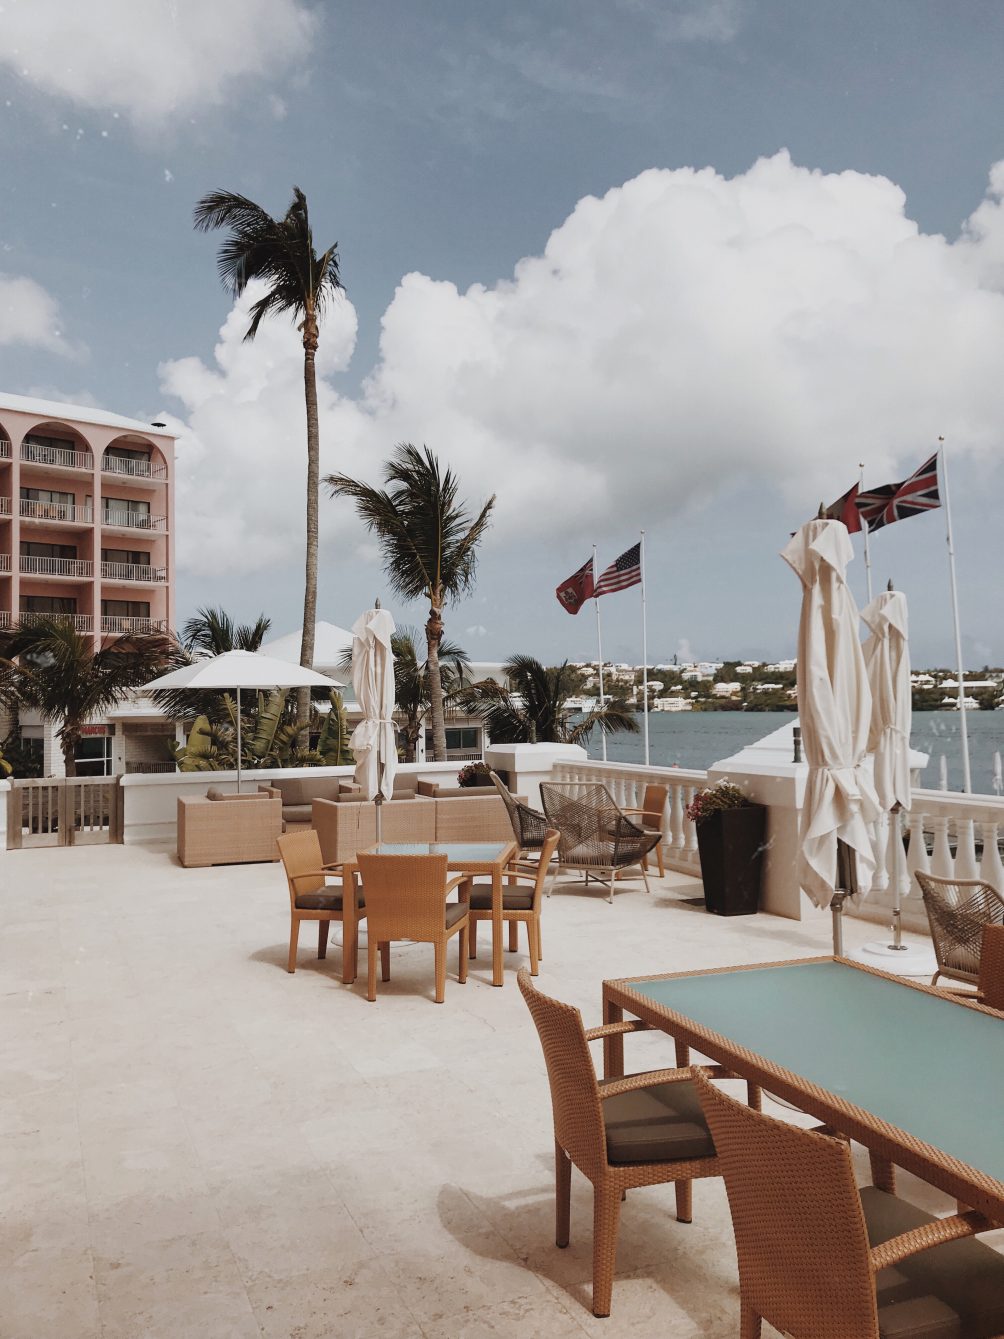 sharing our Bermuda family vacation travels staying at Hamilton Princess with recommendations on what to see, where to eat, and places to shop 